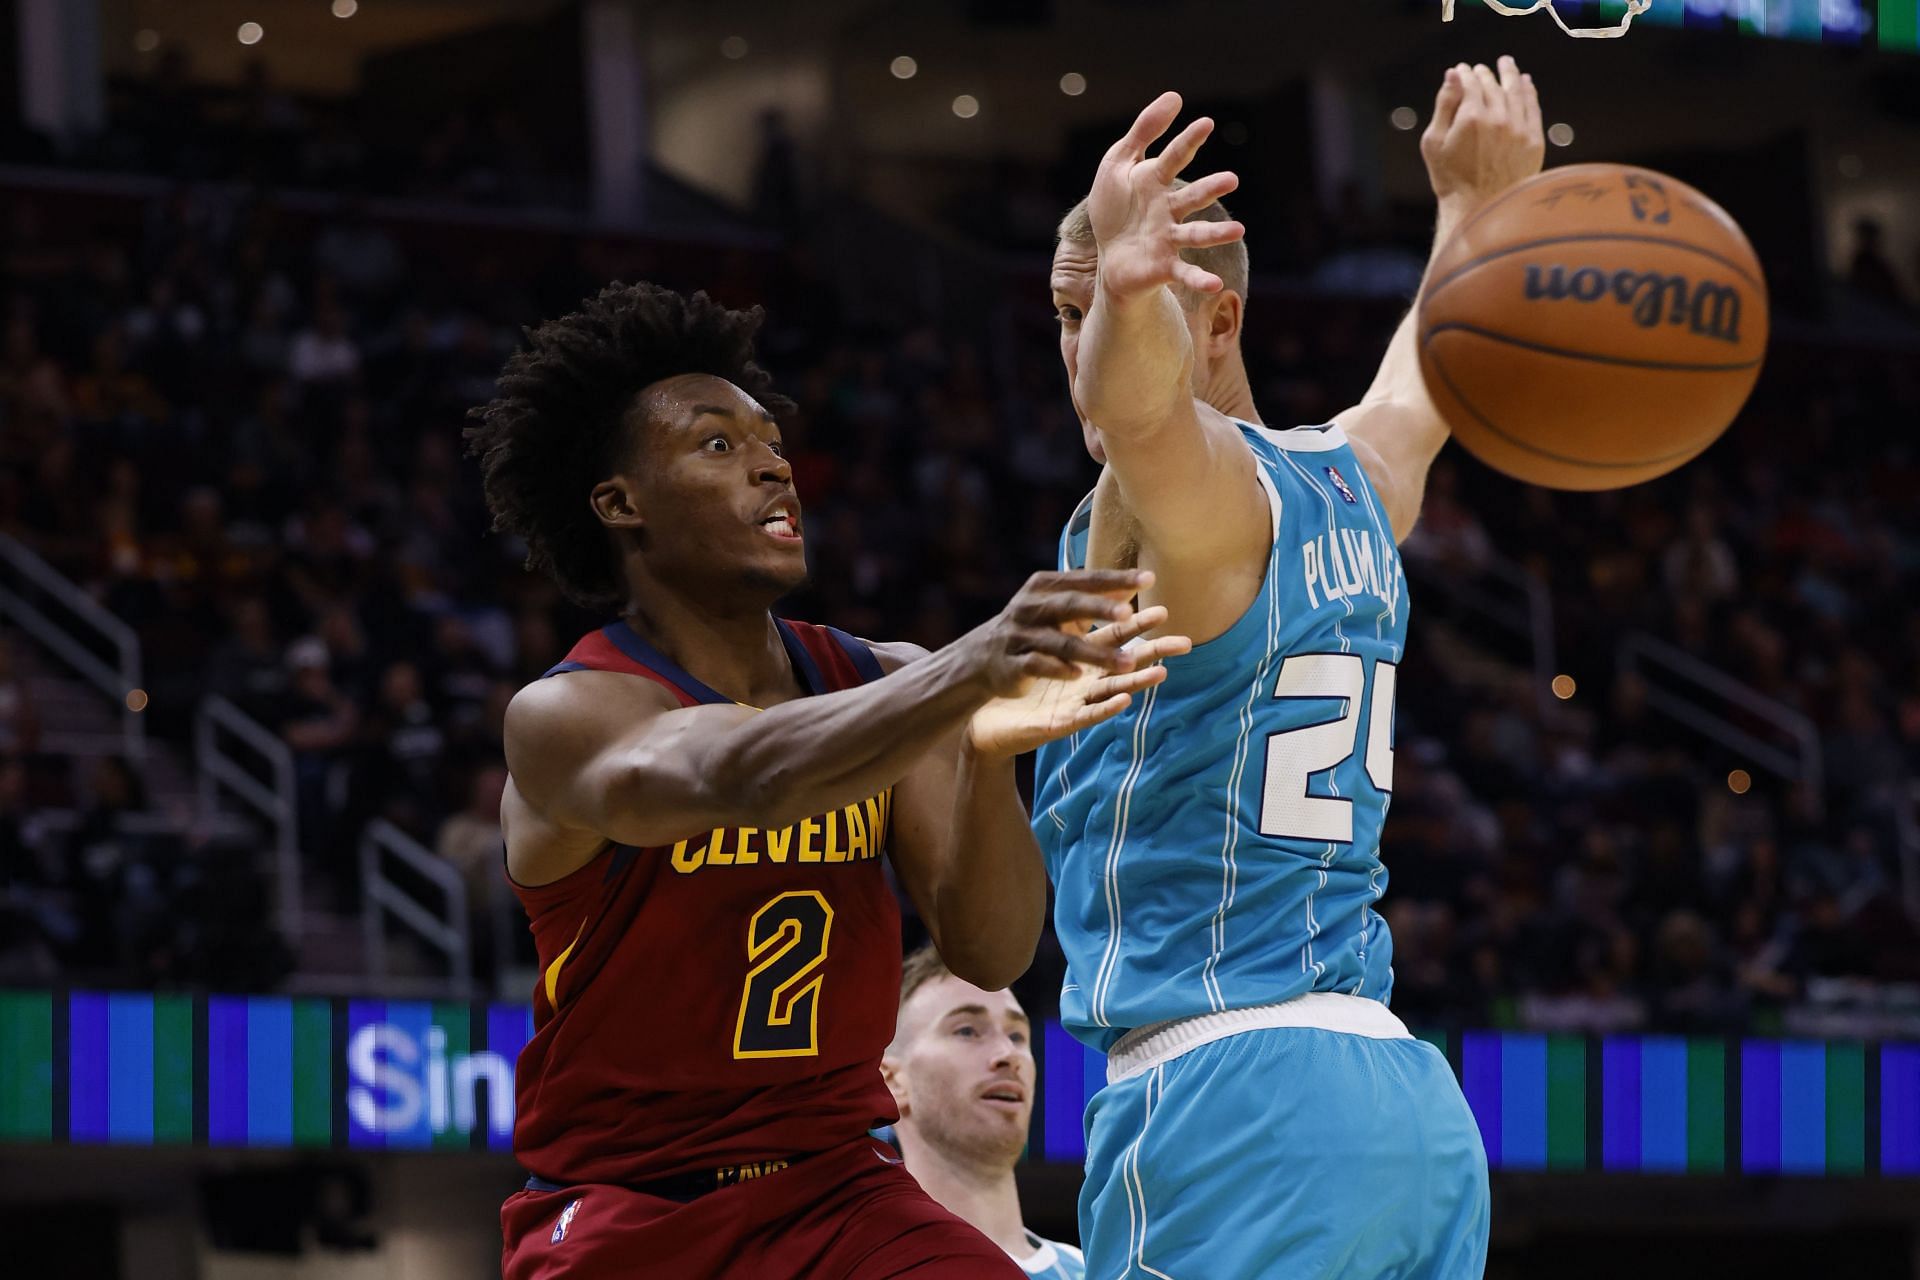 The Cleveland Cavaliers are still looking for their first win of the season after losing to the Charlotte Hornets in their home opener